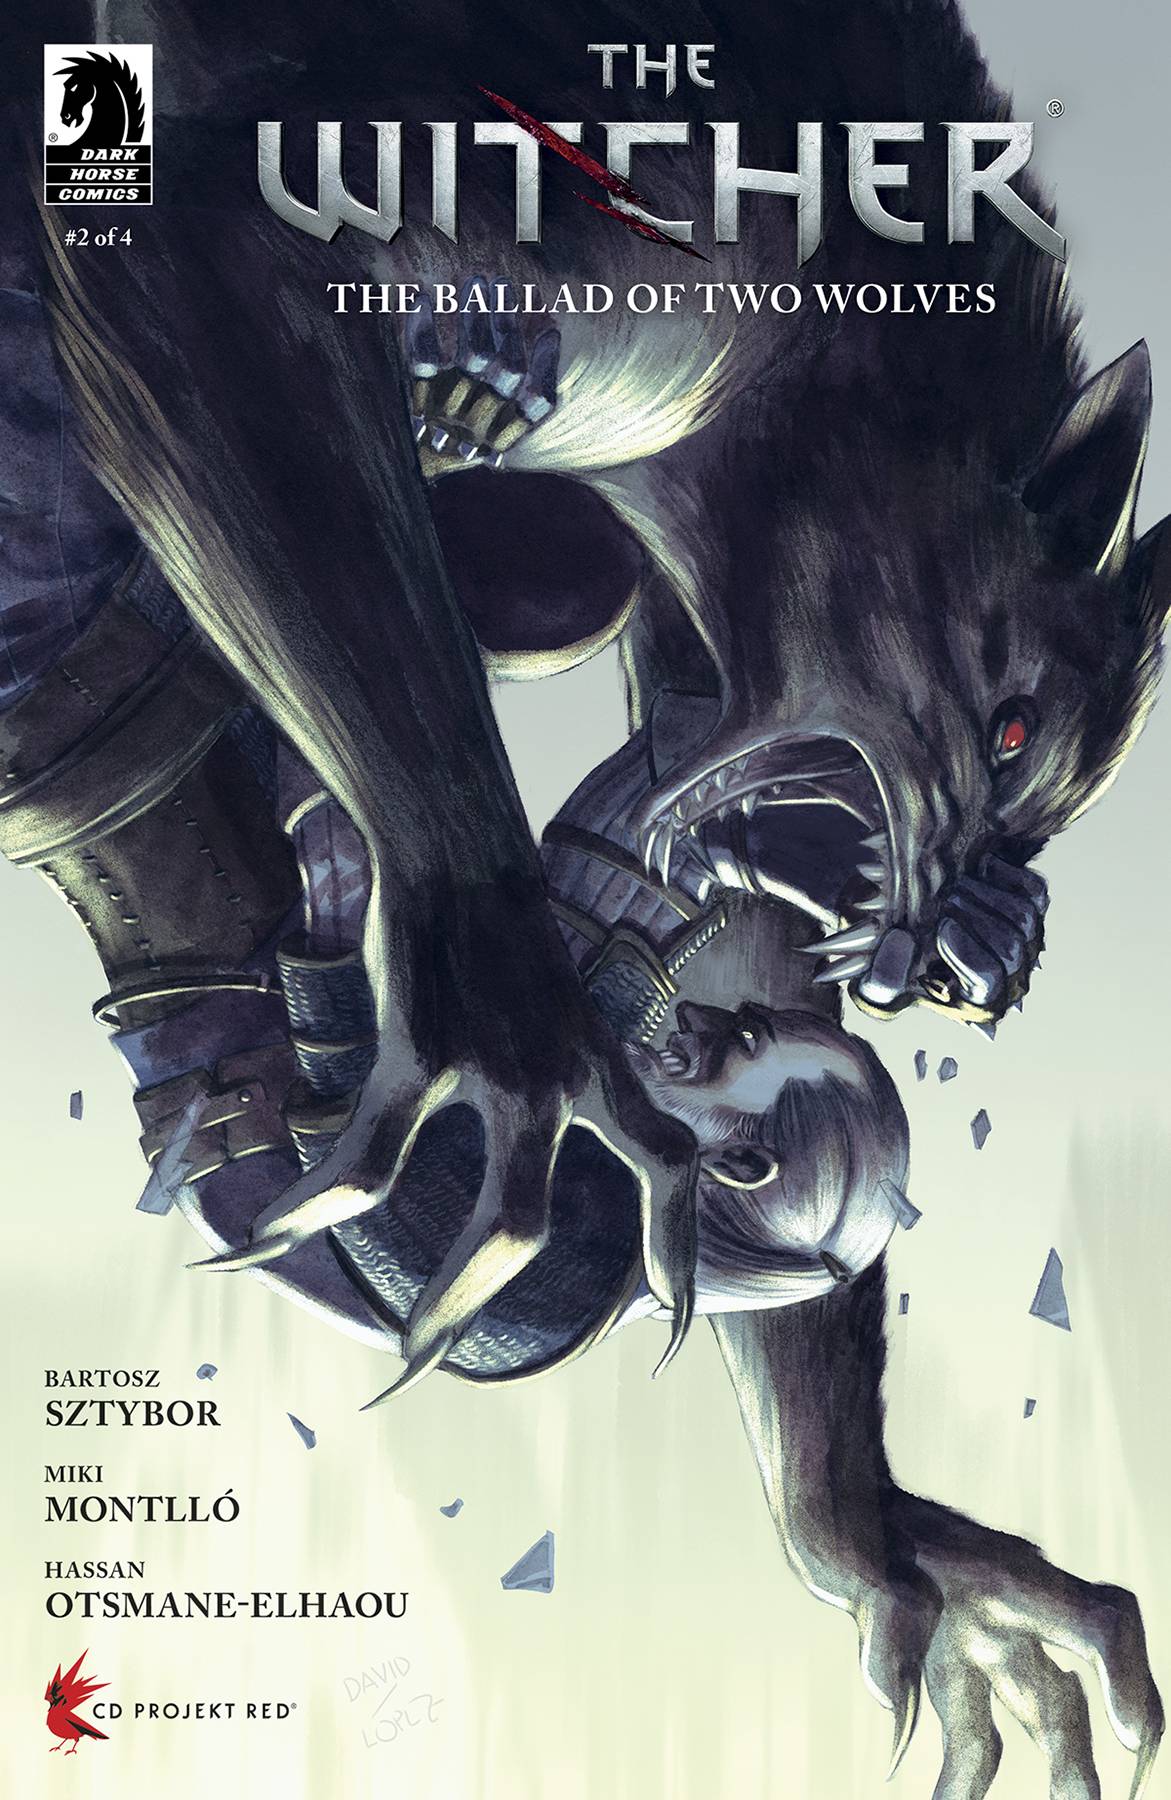 WITCHER THE BALLAD OF TWO WOLVES #2 (OF 4) CVR D LOPEZ